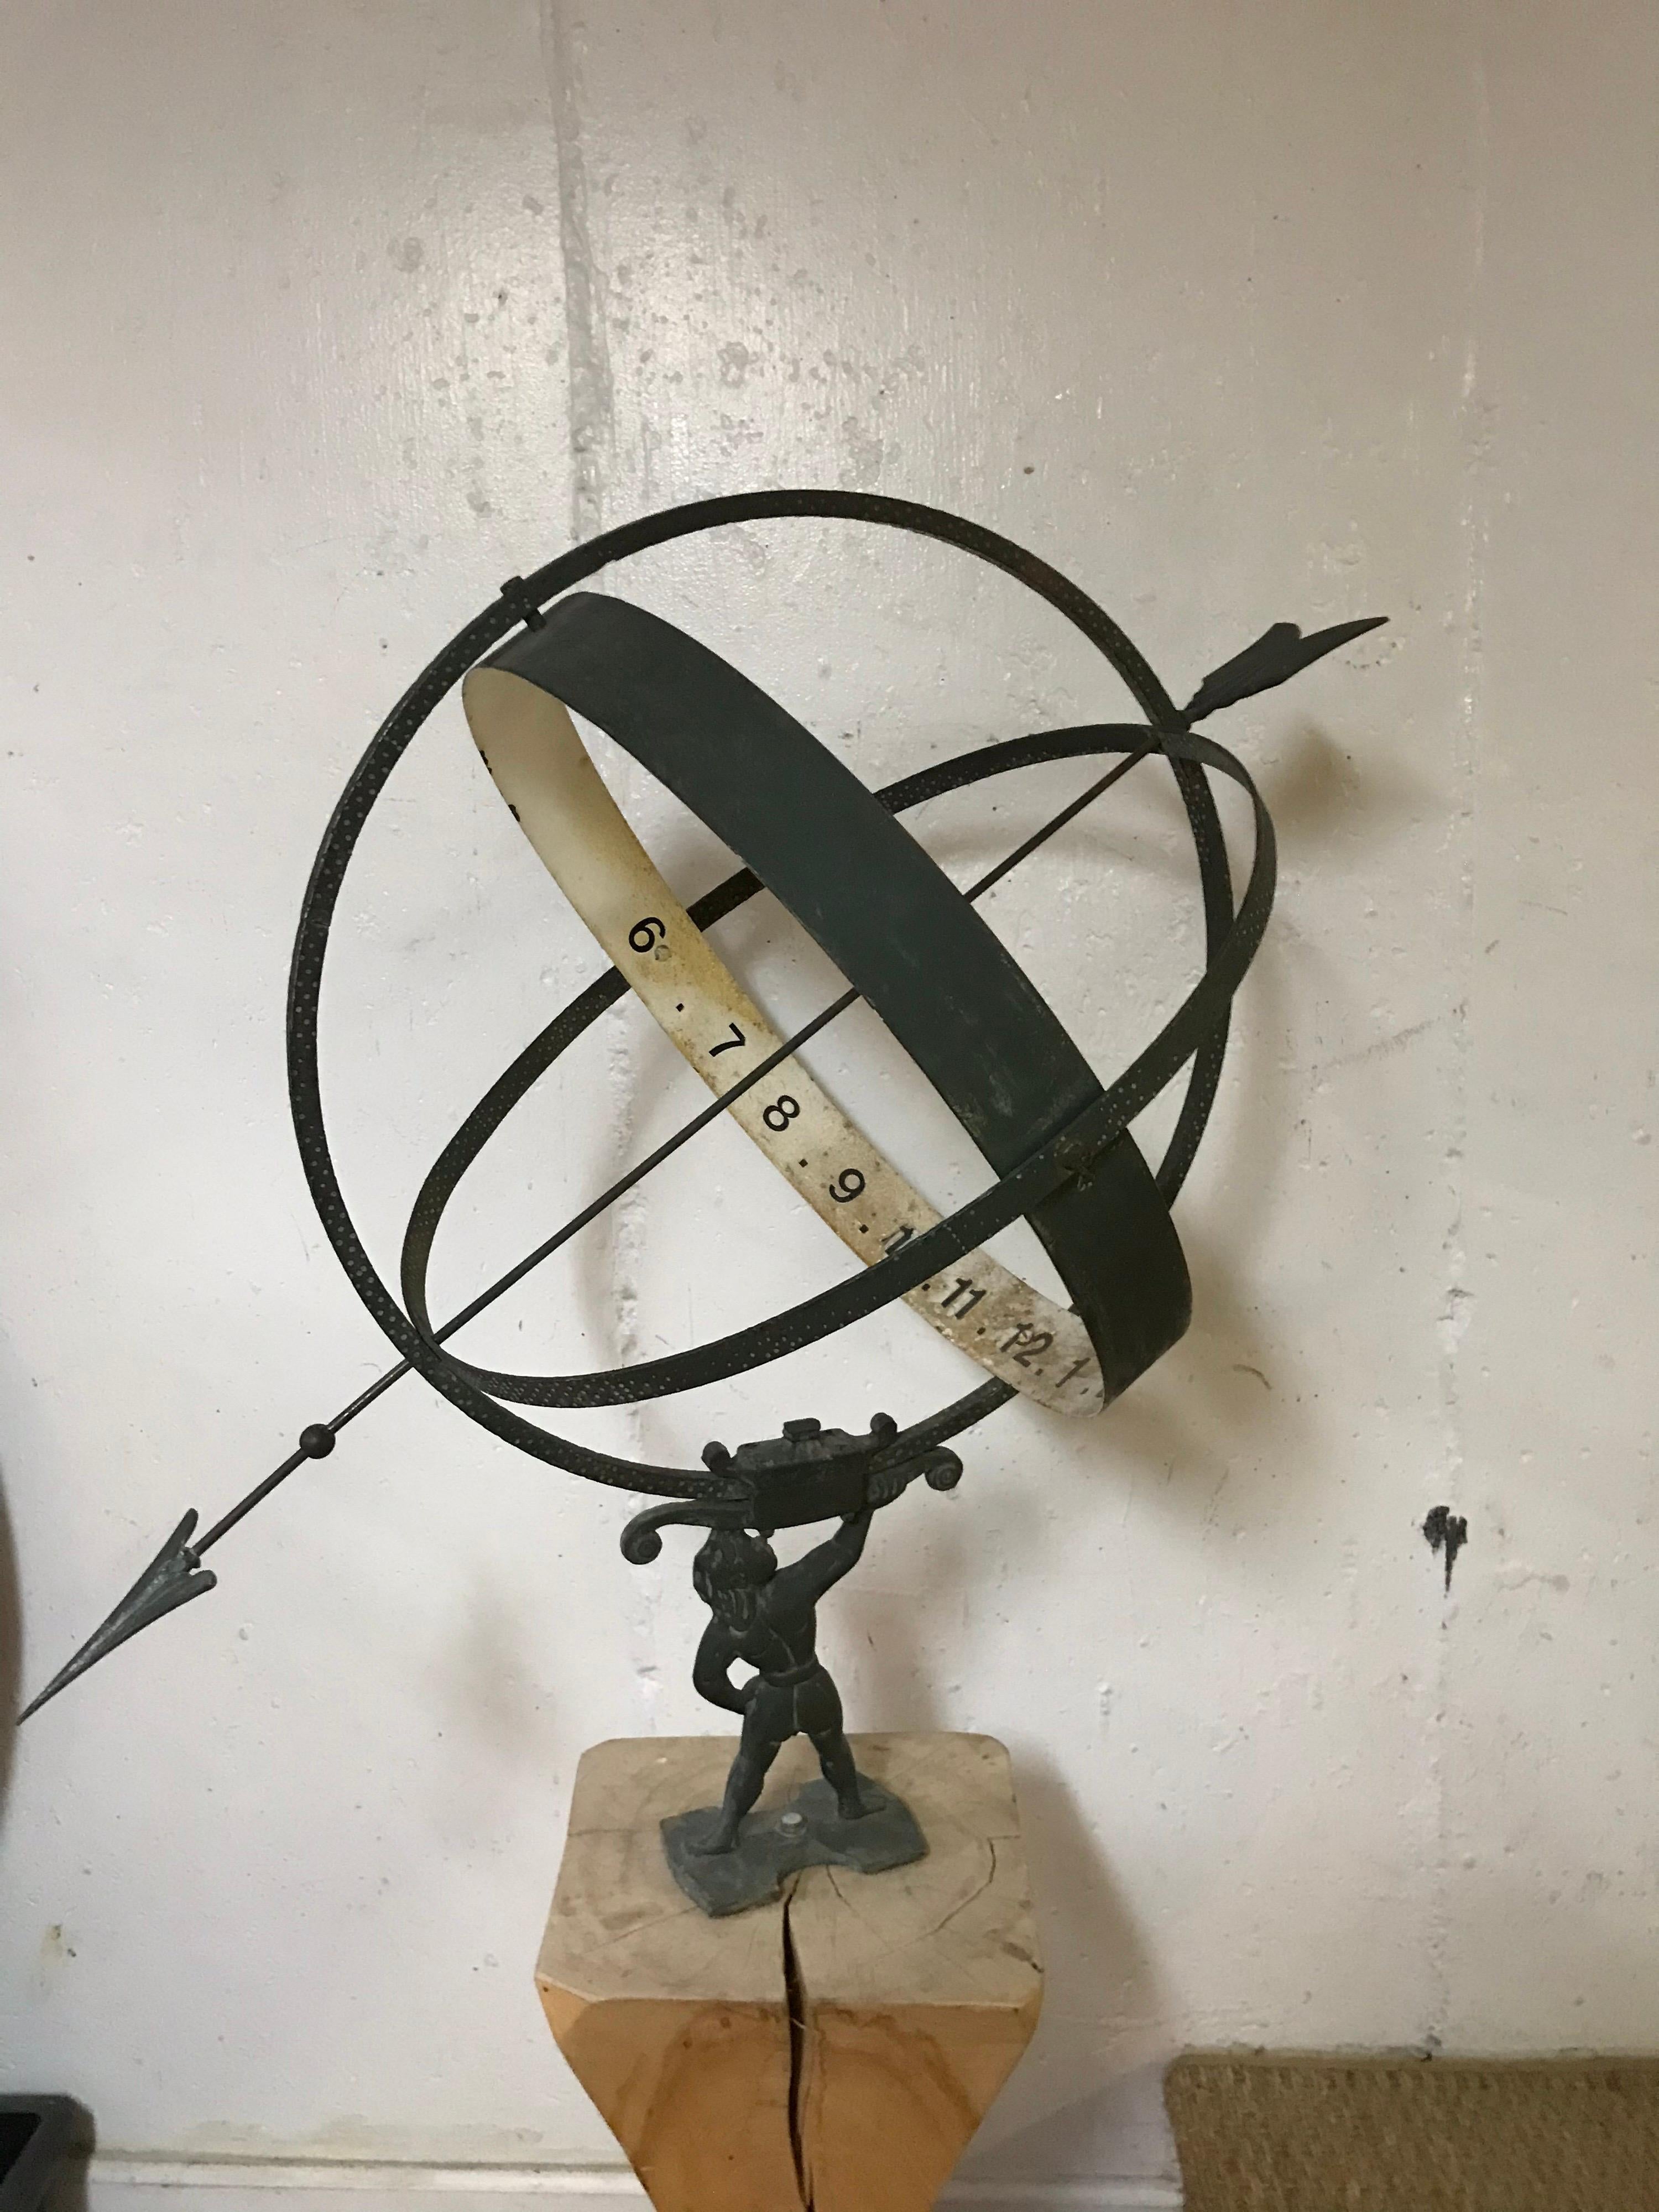 This is a vintage metal Swedish armillary of Atlas mounted on a wood plinth .
The armillary is supported on the arm of Atlas and there is banding with numerals on it . The numbers don't appear to be the originals. The Armillary could be detached